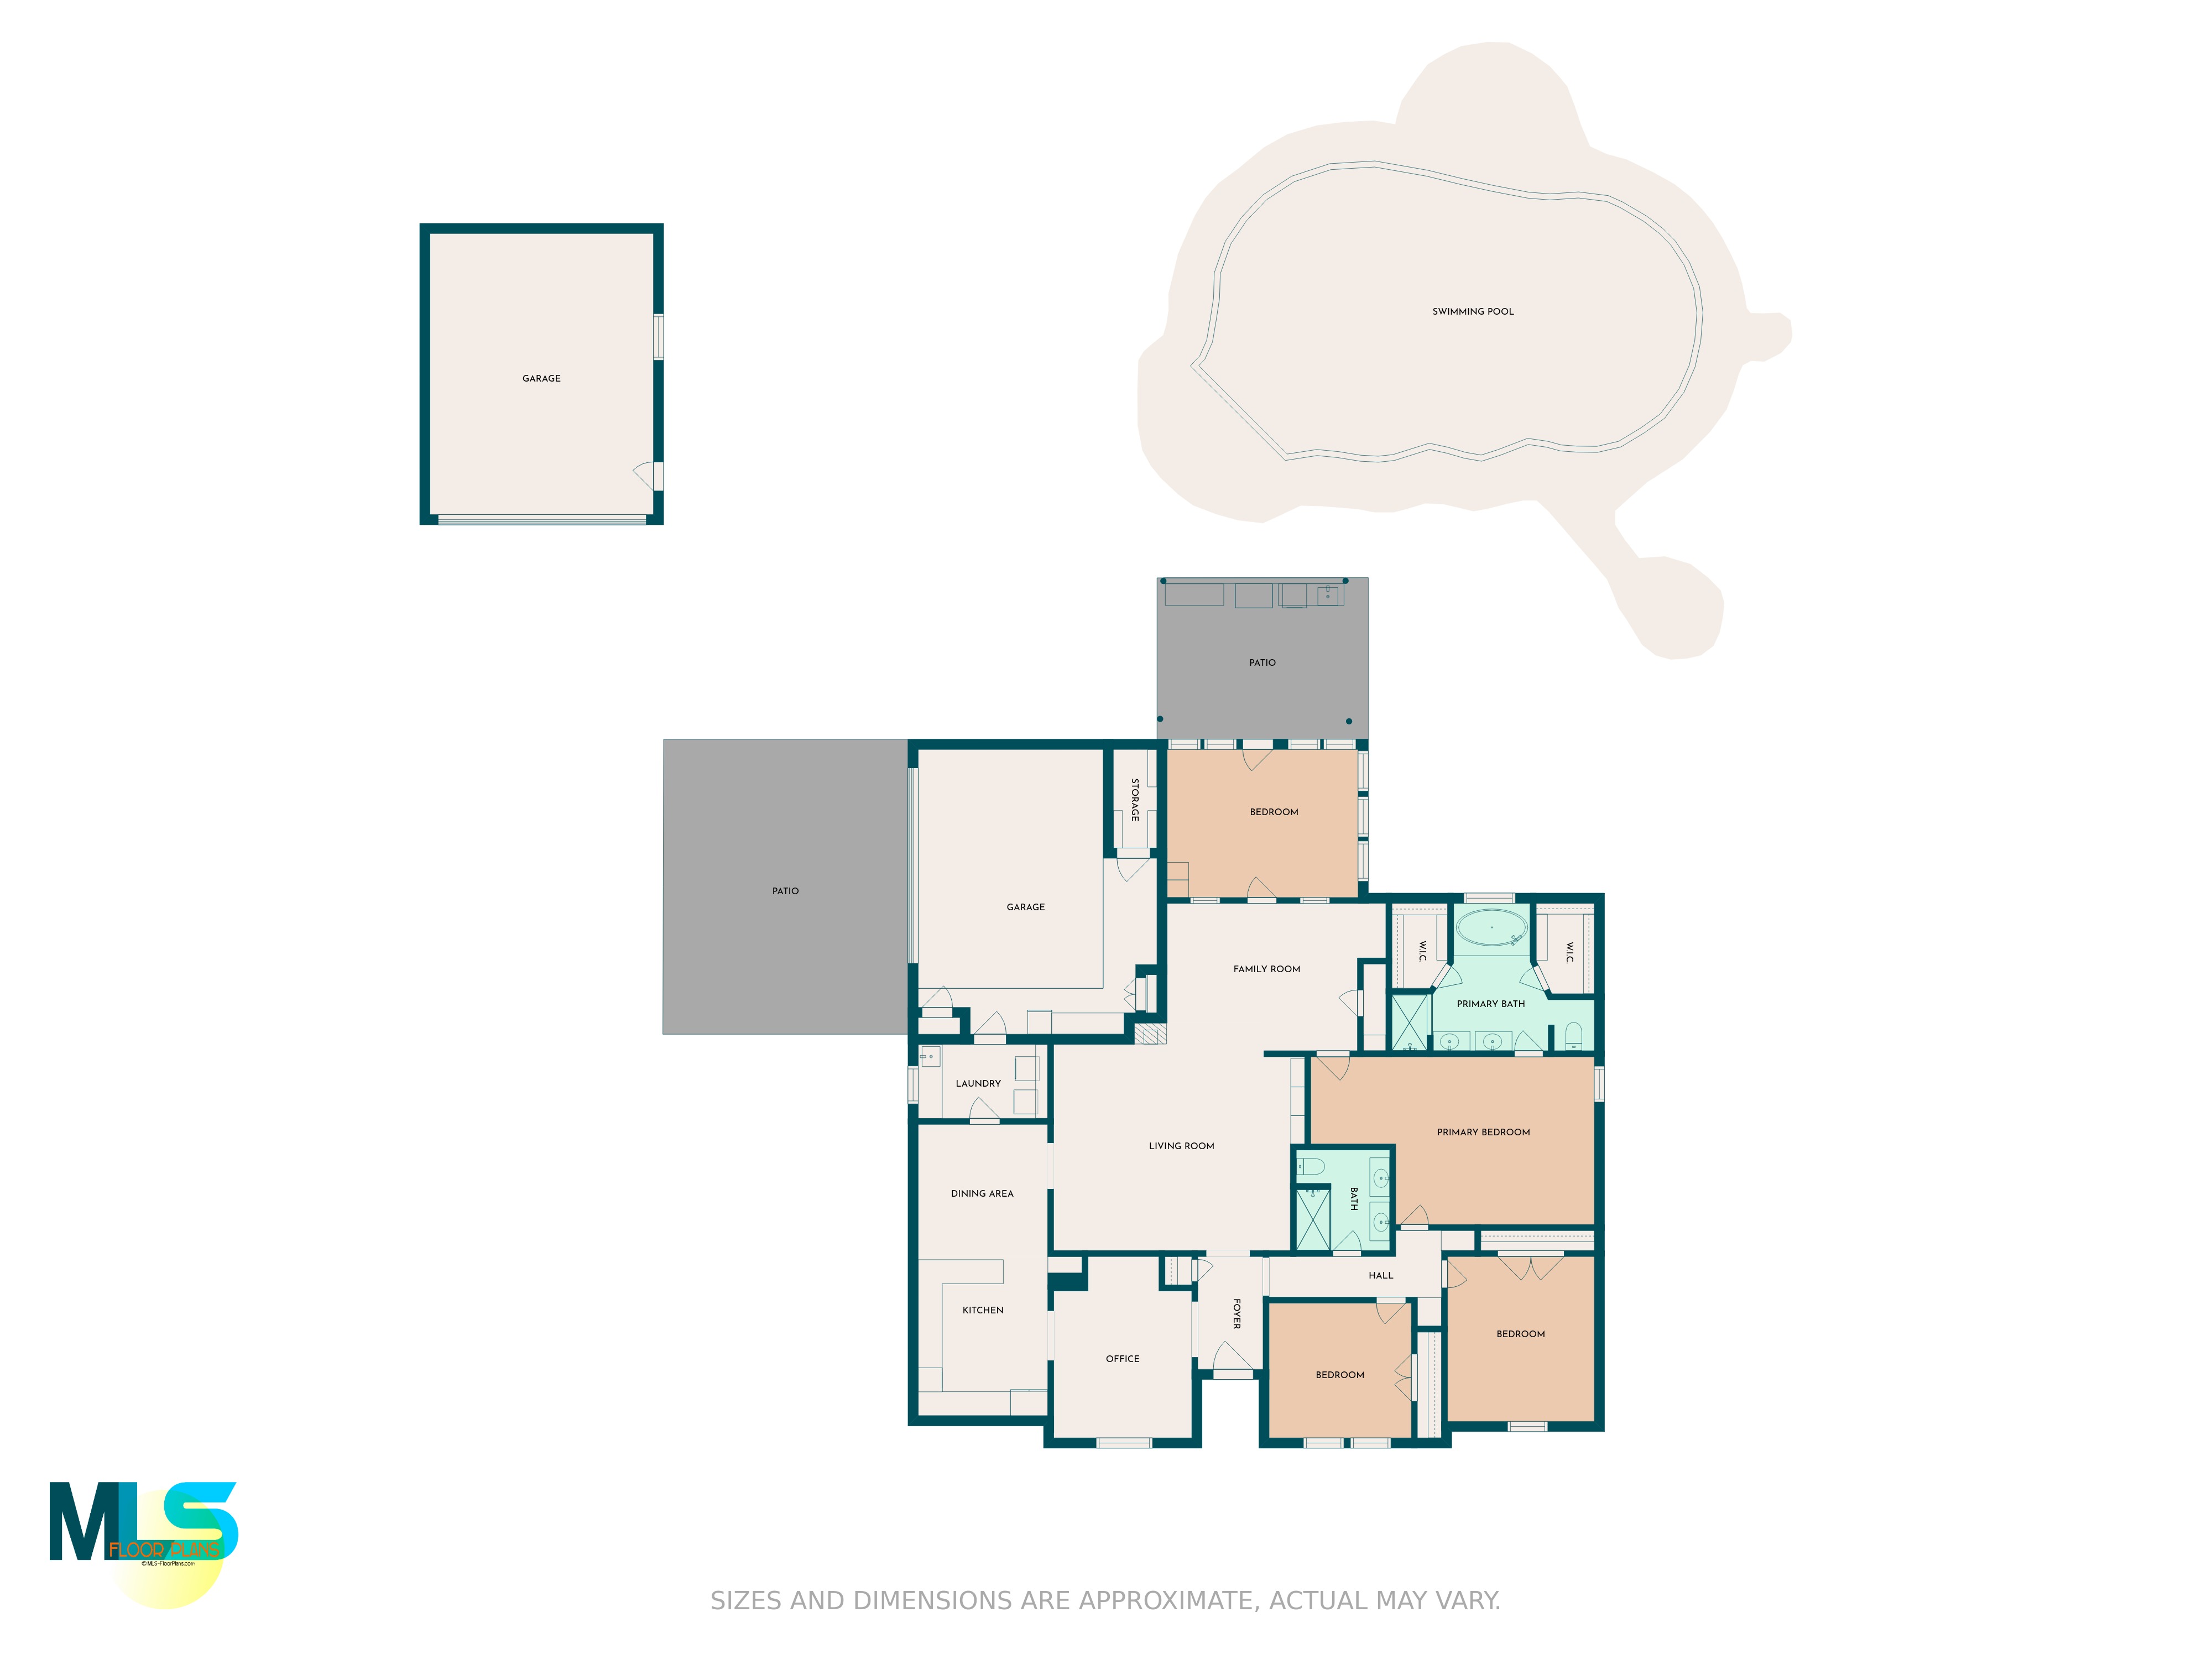 Floorplan for 128 Berry Dr, Haslet, Texas 76052